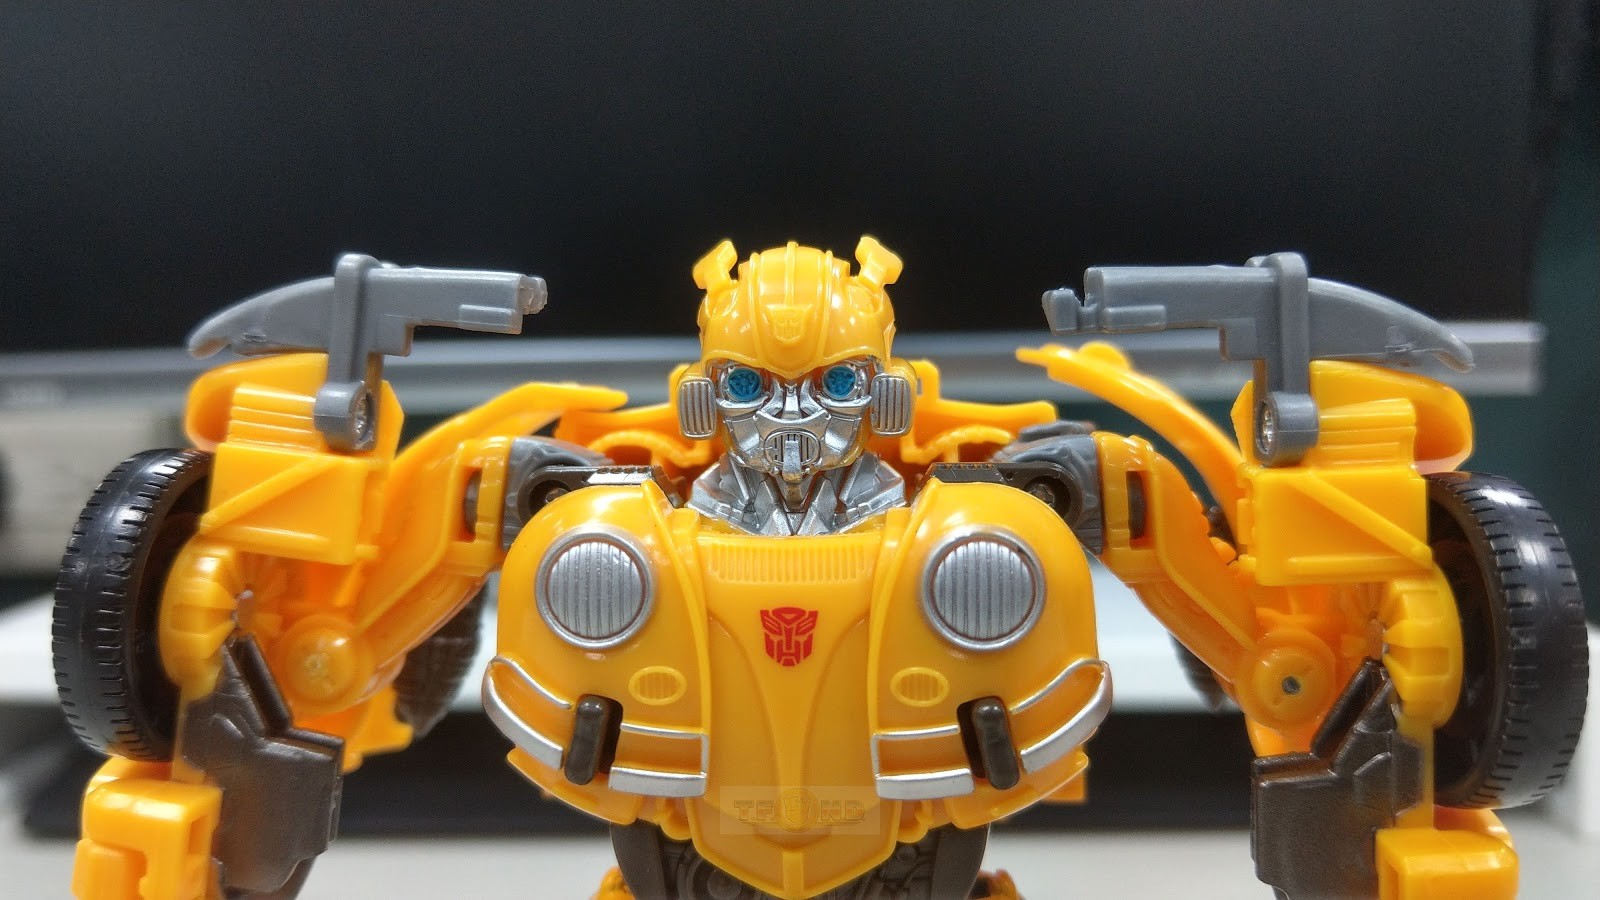 Transformers News: Transformers: Bumblebee Energon Igniters Nitro Series In-Hand Pictures and Demo Videos